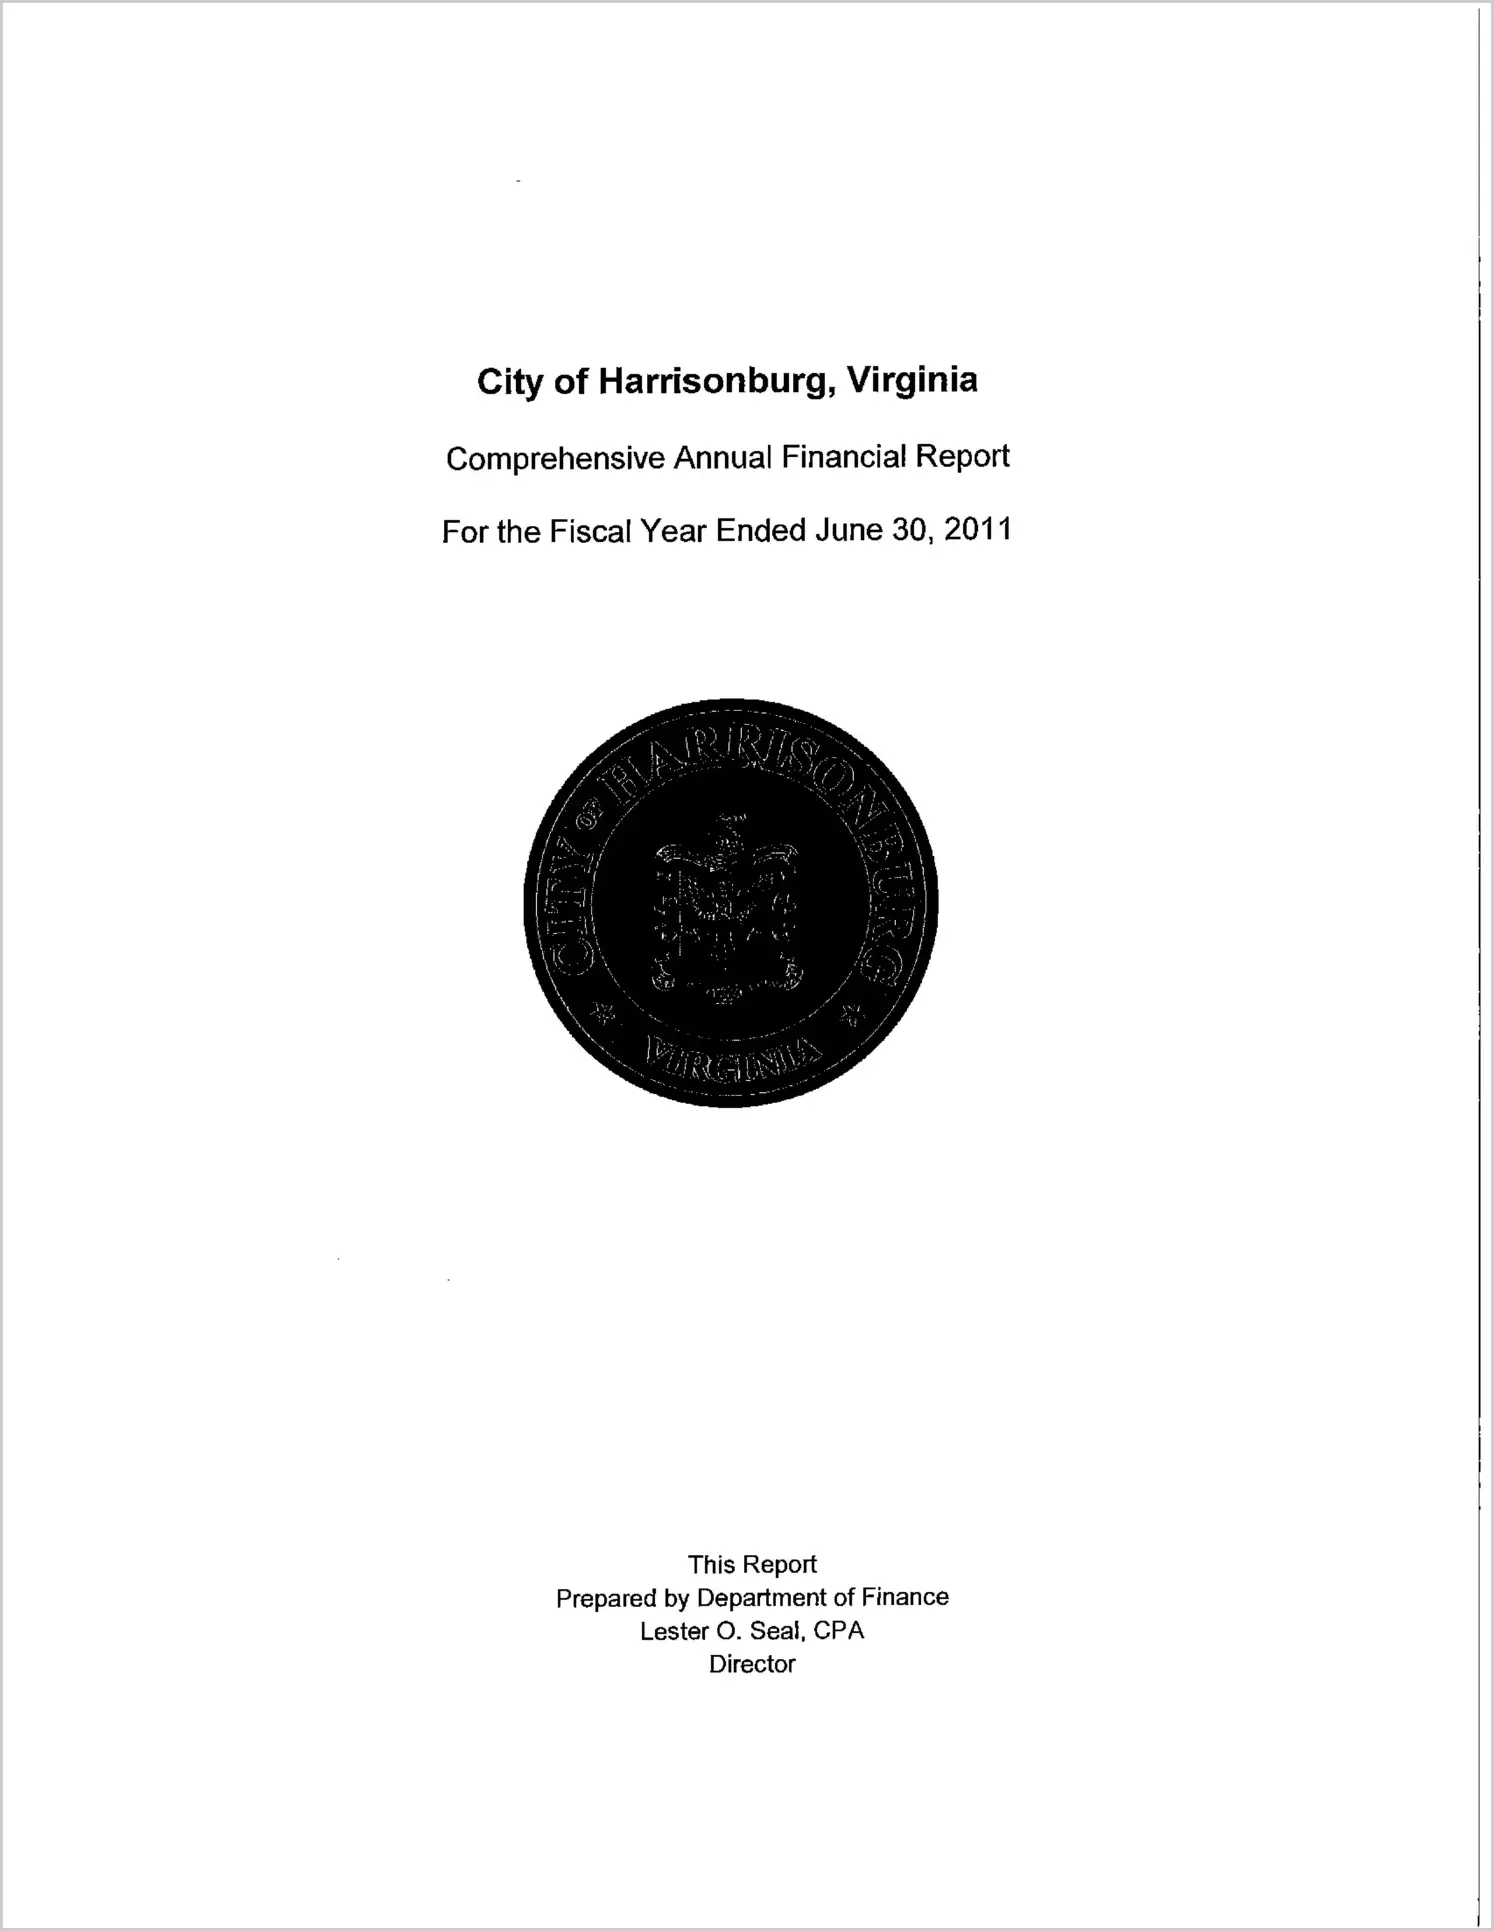 2010 Annual Financial Report for City of Harrisonburg